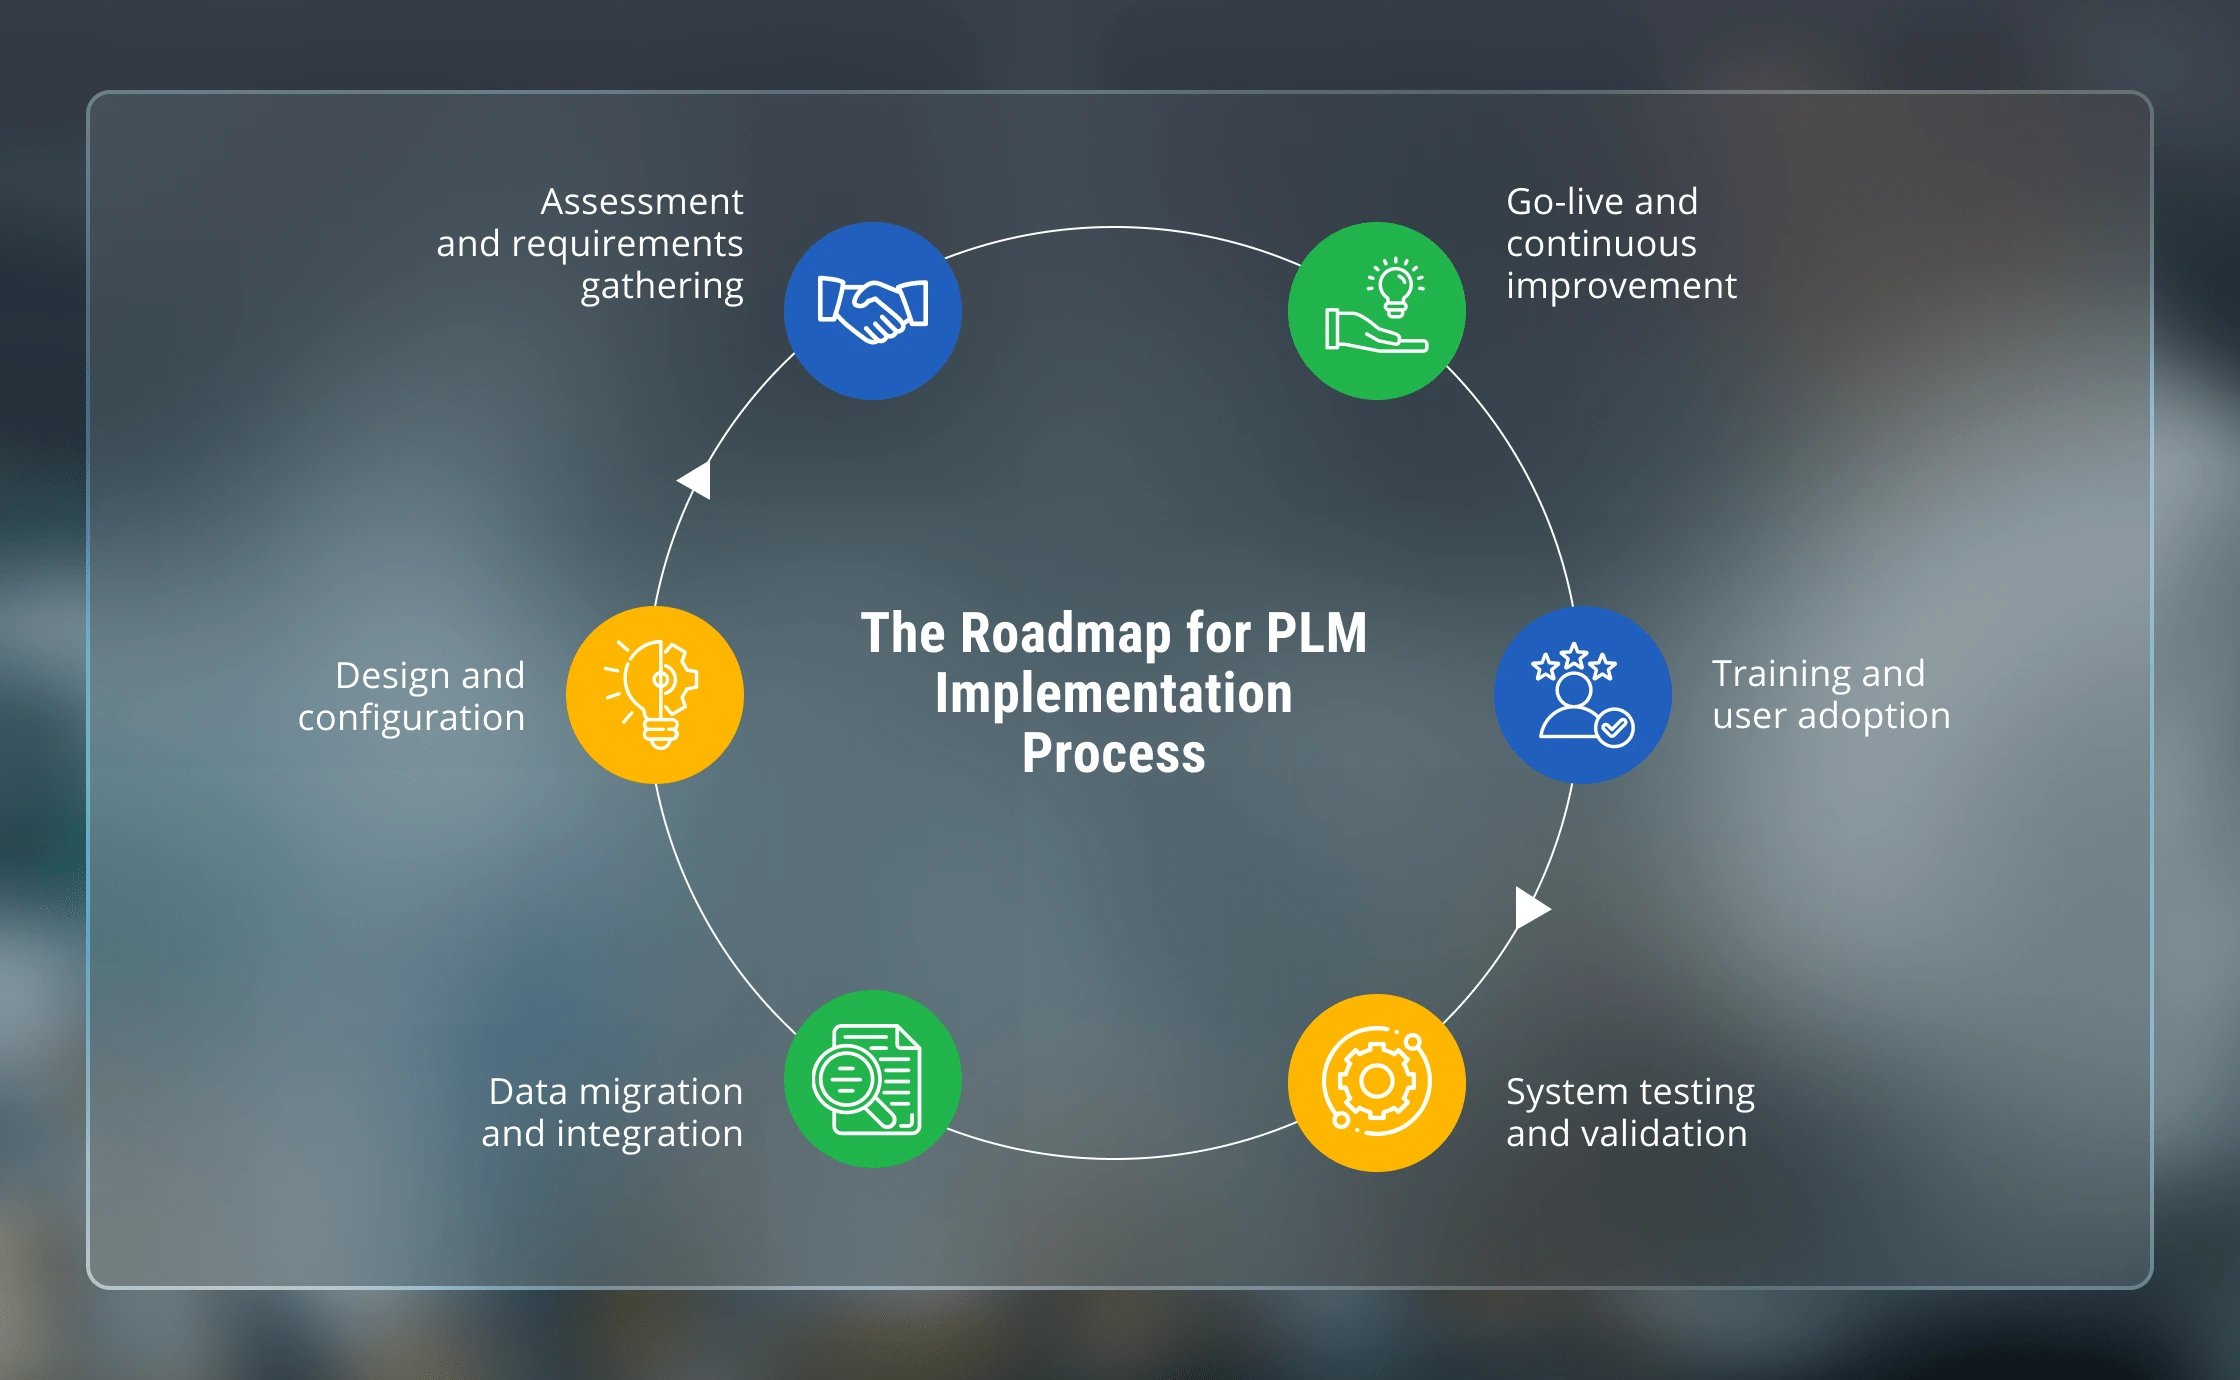 The Roadmap for PLM Implementation Process